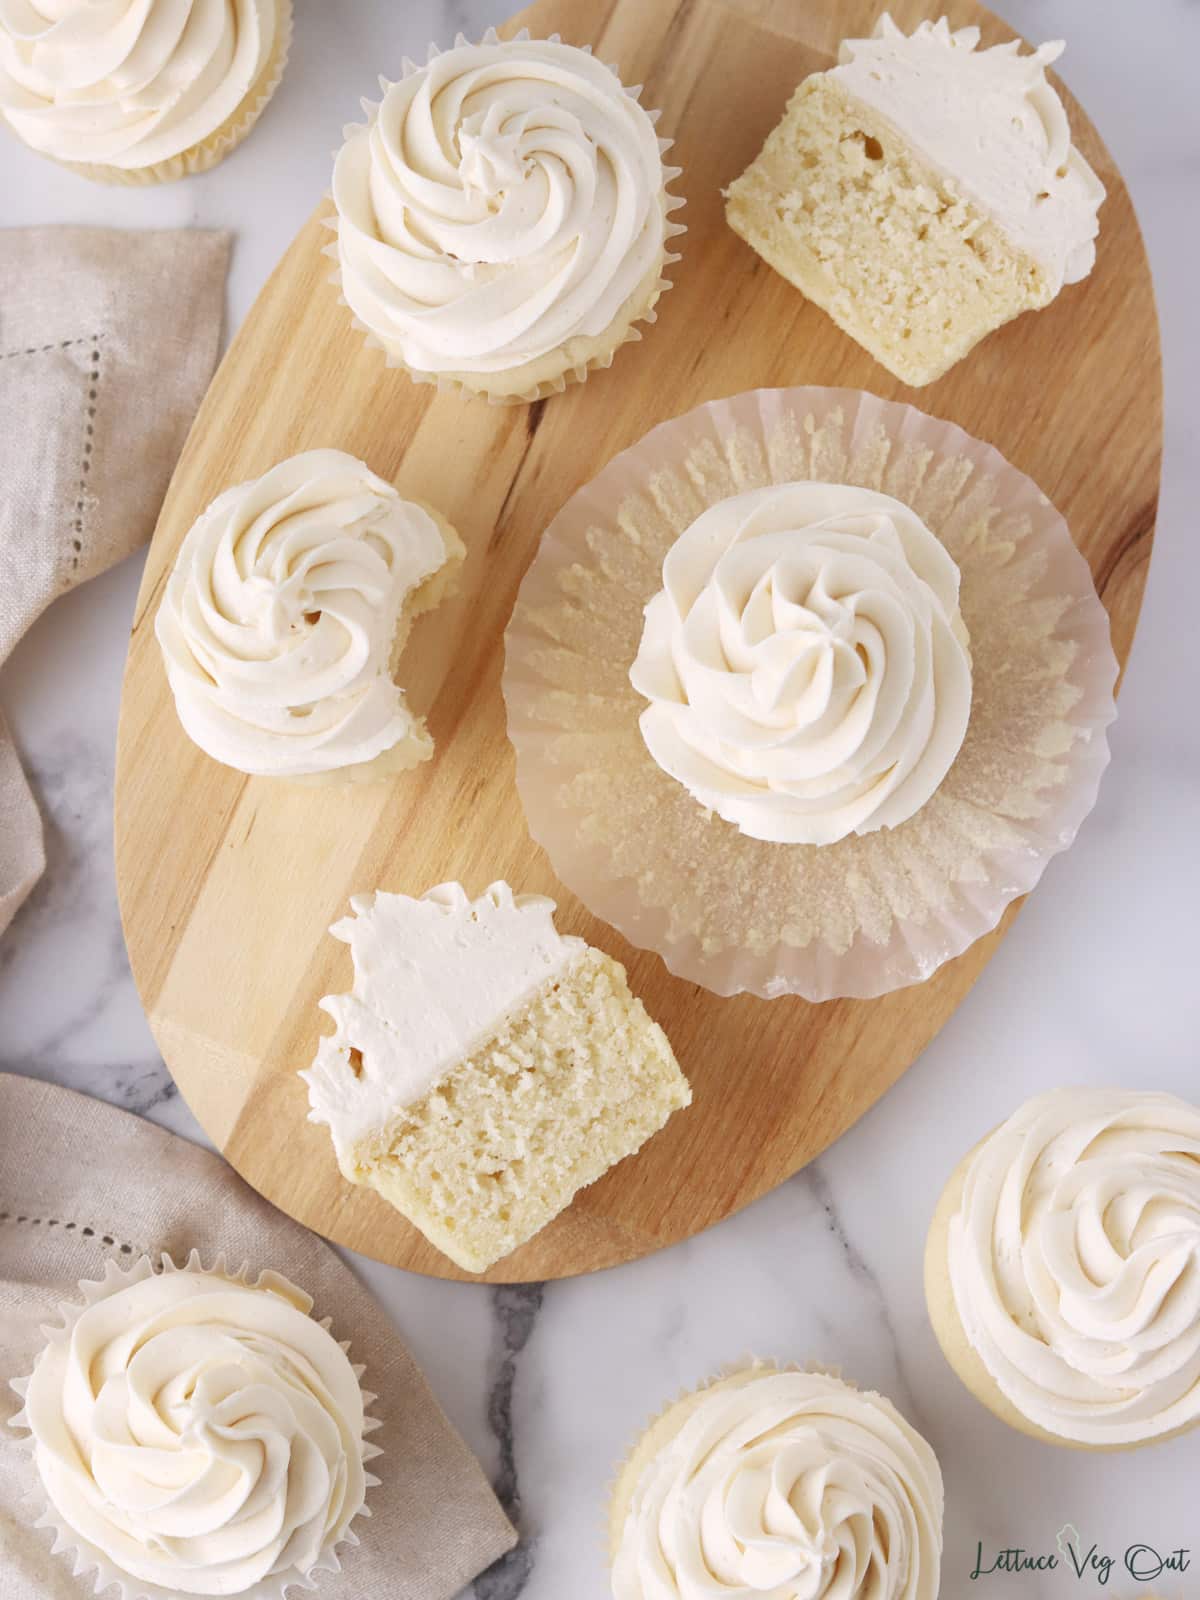 Whole and halved vanilla cupcakes on a wood board, some cupcakes on their side, all topped with a large swirl of vanilla buttercream frosting.